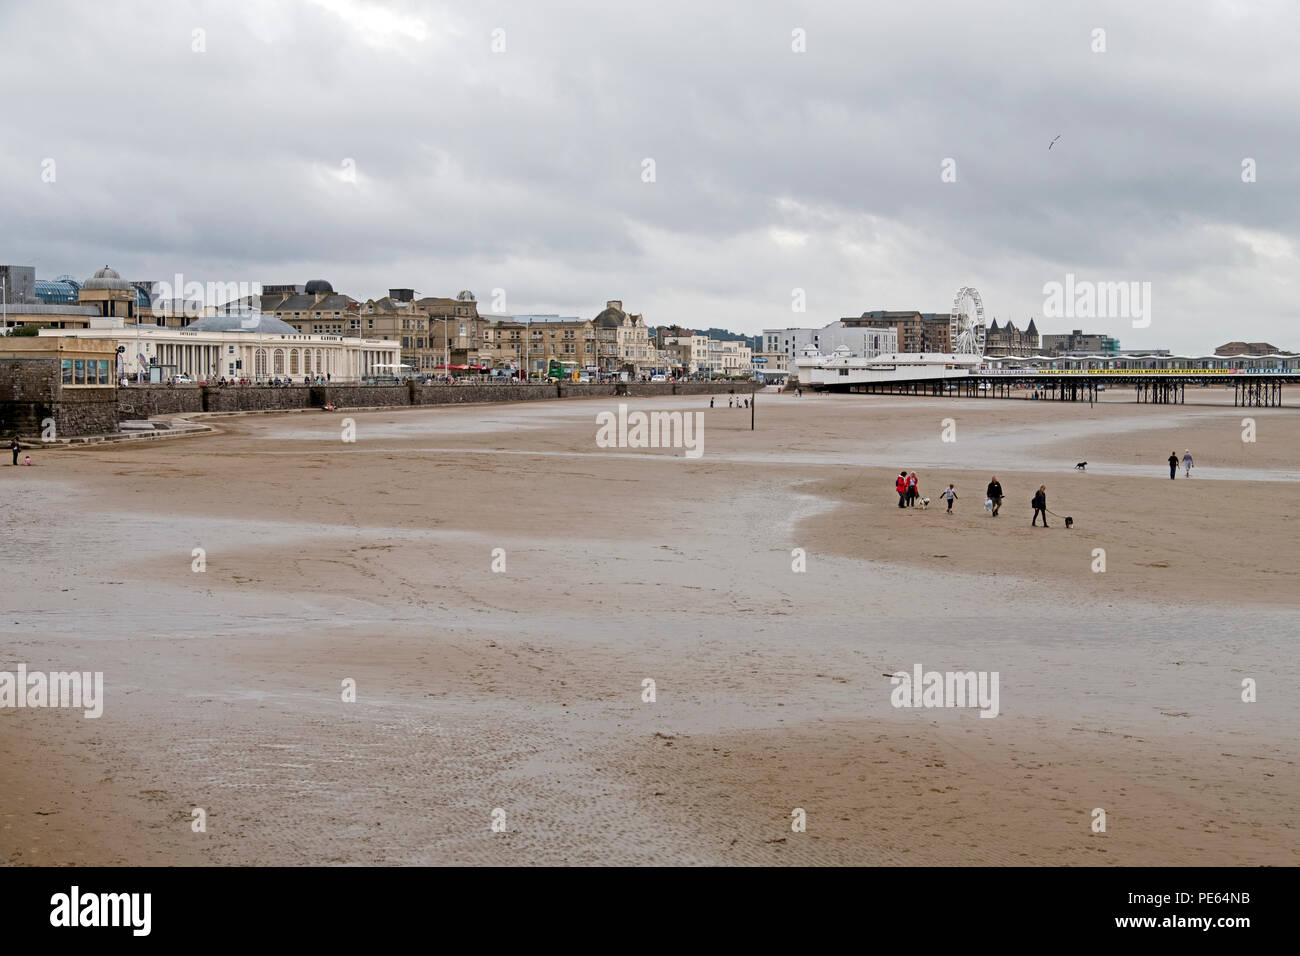 Weston-super-Mare, UK. 12th August, 2018. UK weather: after many hours of rain, a dry but overcast and breezy Sunday afternoon failed to bring many holidaymakers onto the beach, with some of those who did venture out wearing coats. Keith Ramsey/Alamy Live News Stock Photo